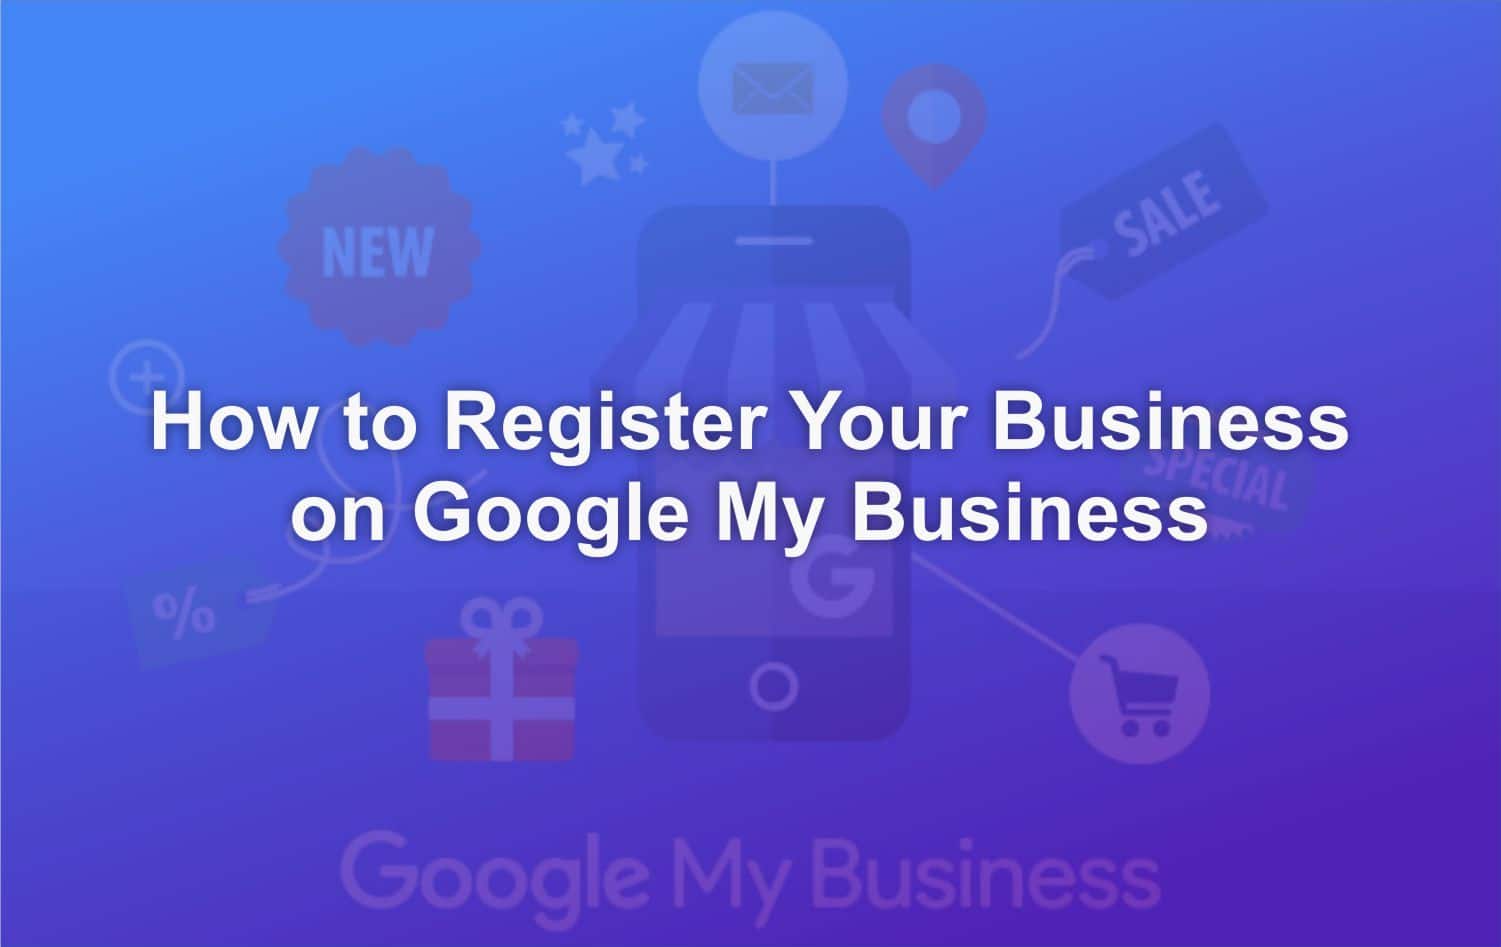 How to Register Your Business on Google My Business